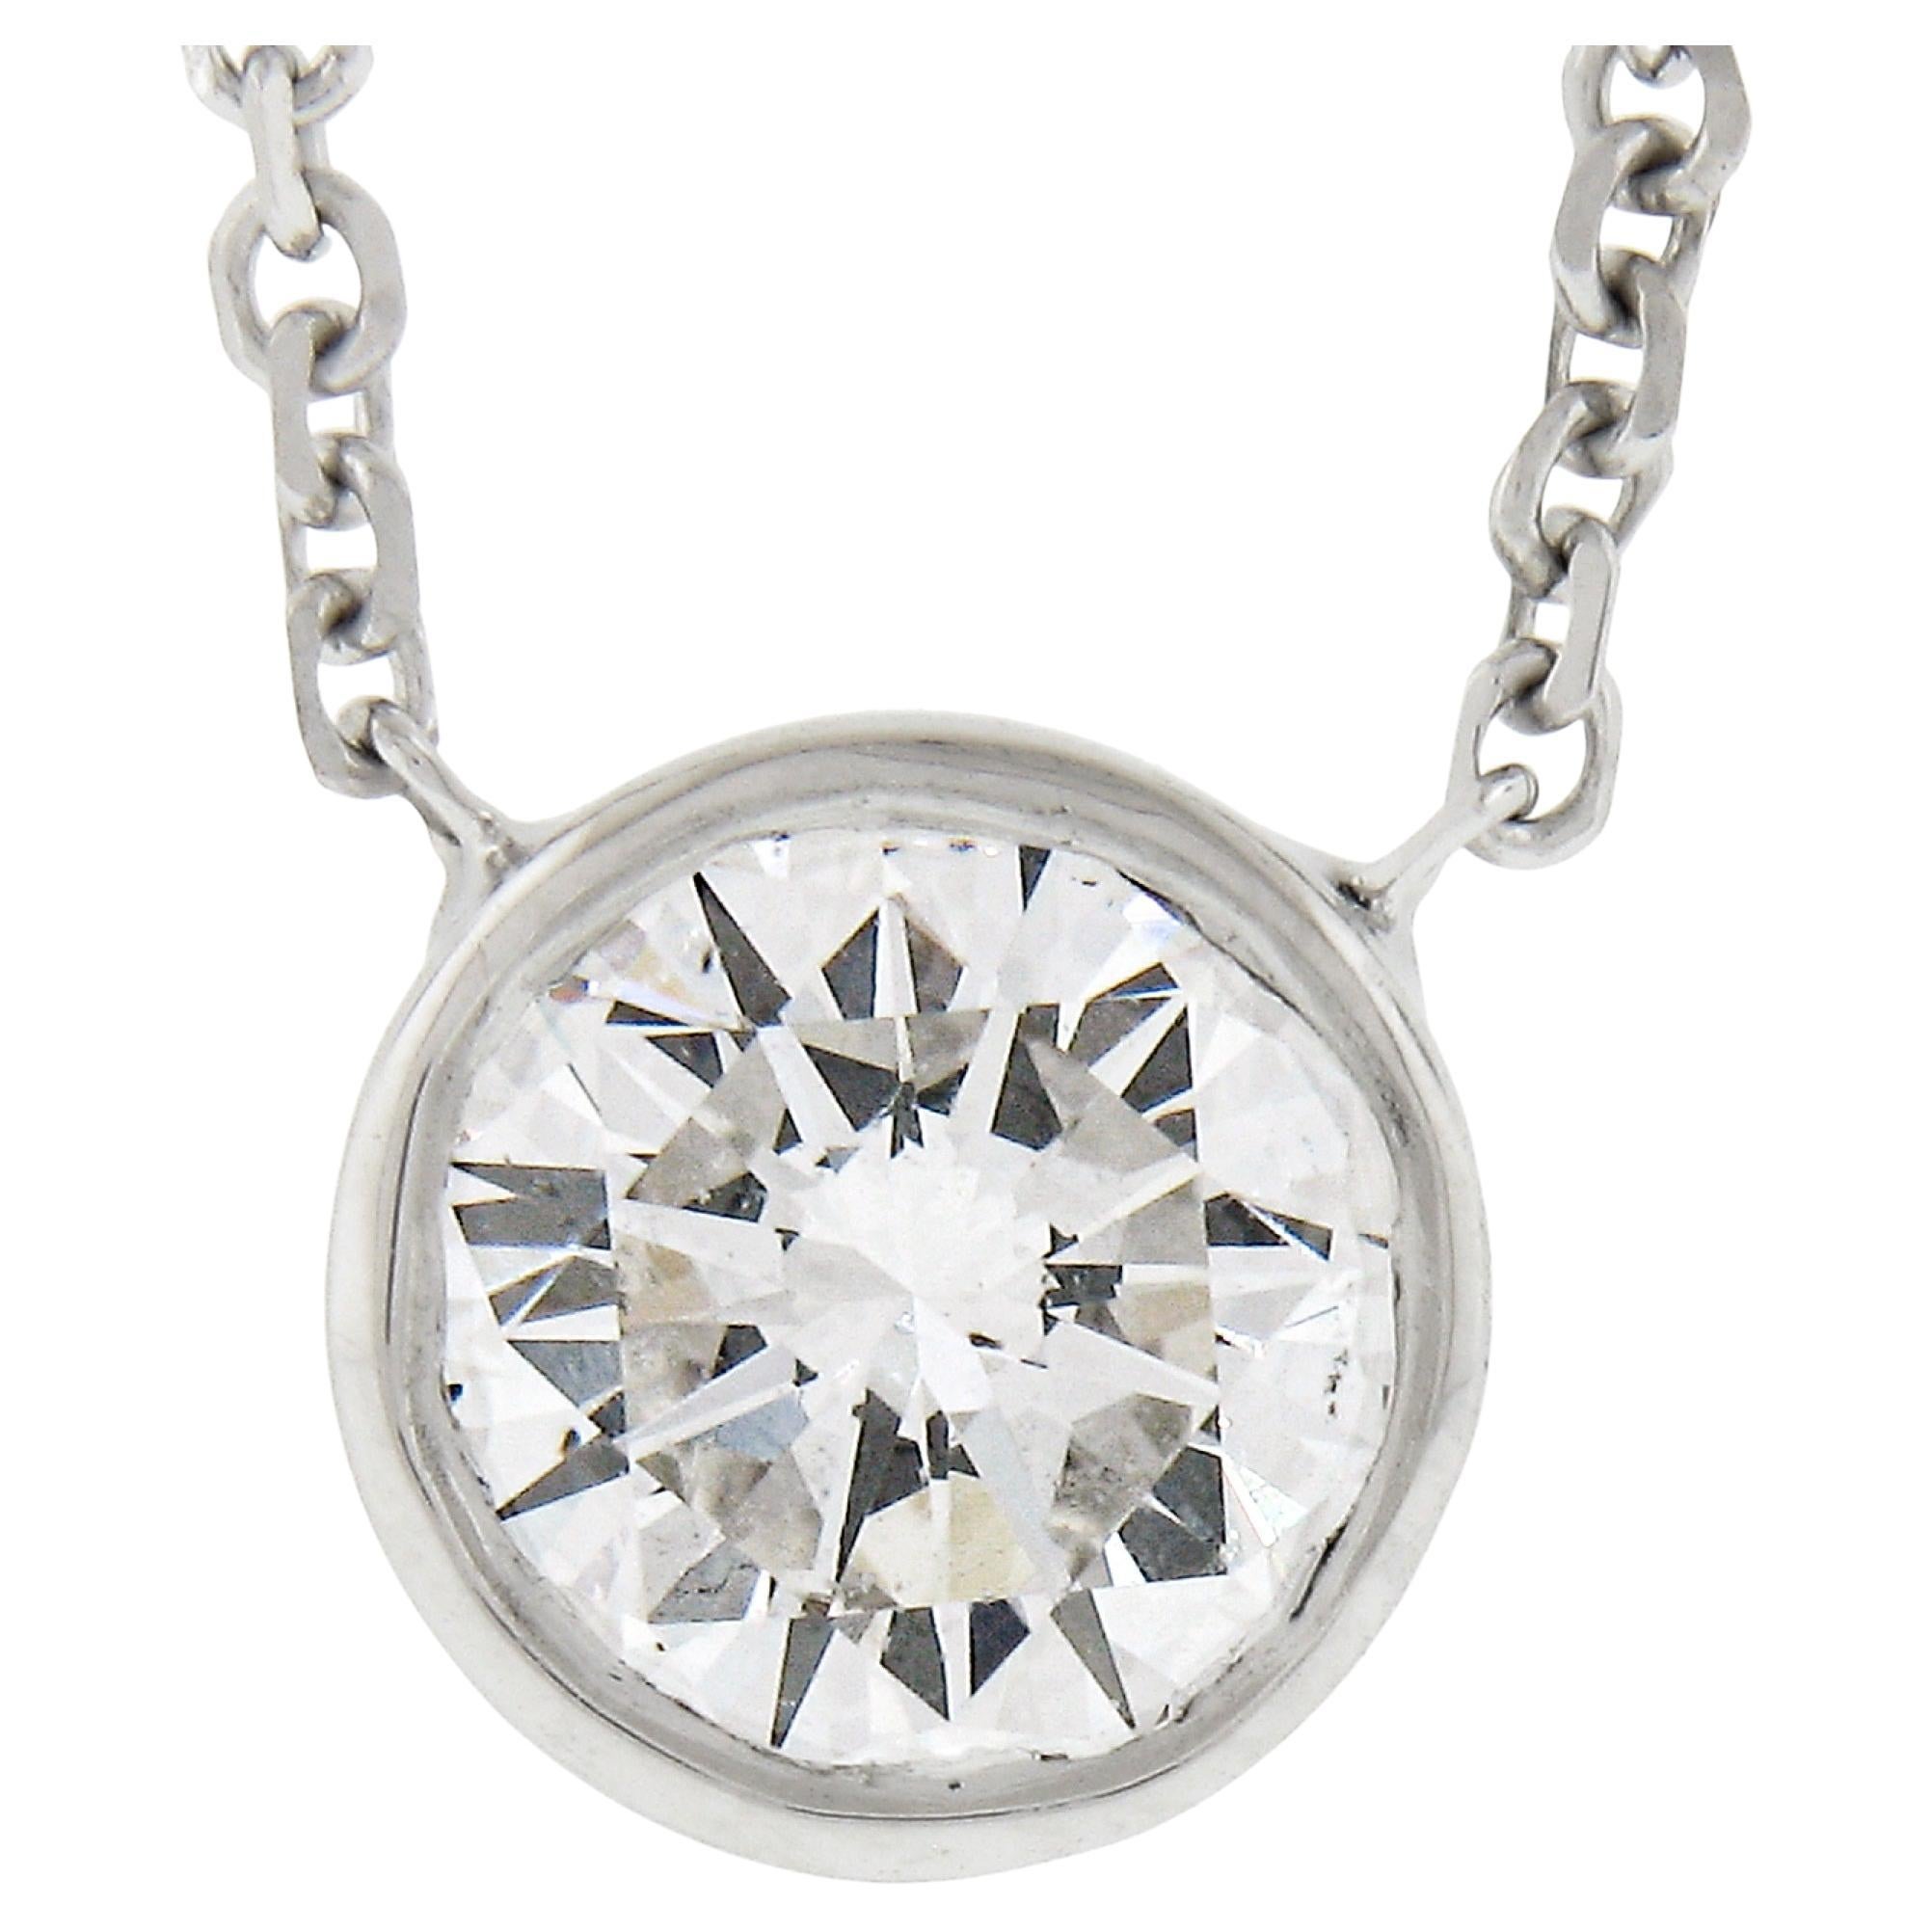 NEW 14k White Gold .84ctw GIA Round Diamond Solitaire Pendant & Adjustable Chain For Sale